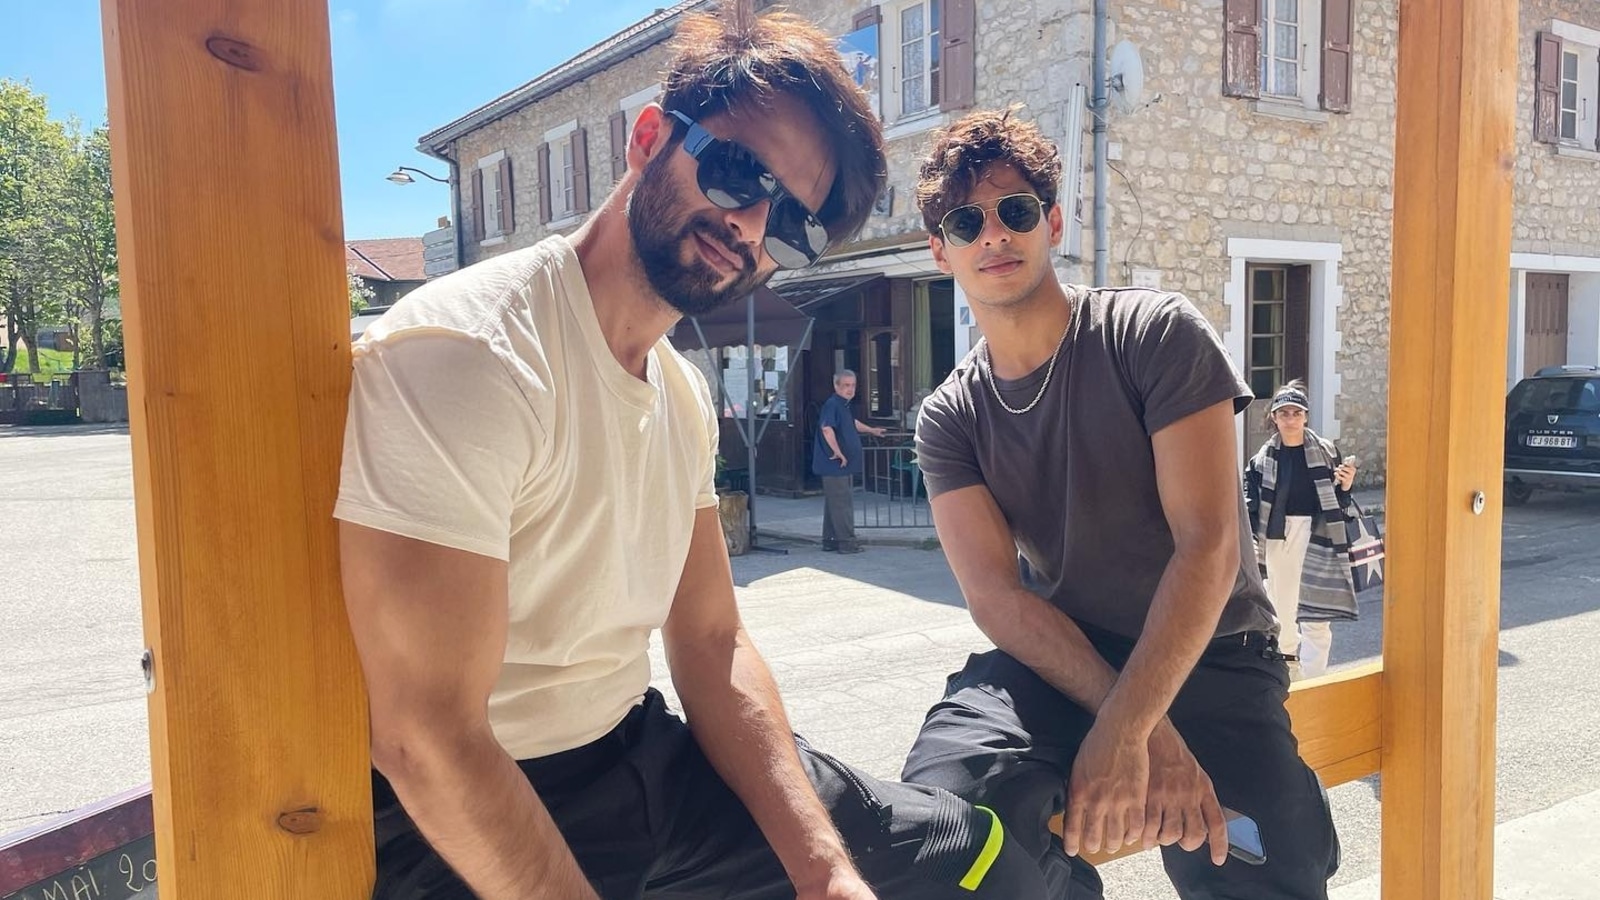 Shahid Kapoor poses with brother Ishaan Khatter in new pic from France, mom Neliima Azeem reacts: ‘Looking dapper’